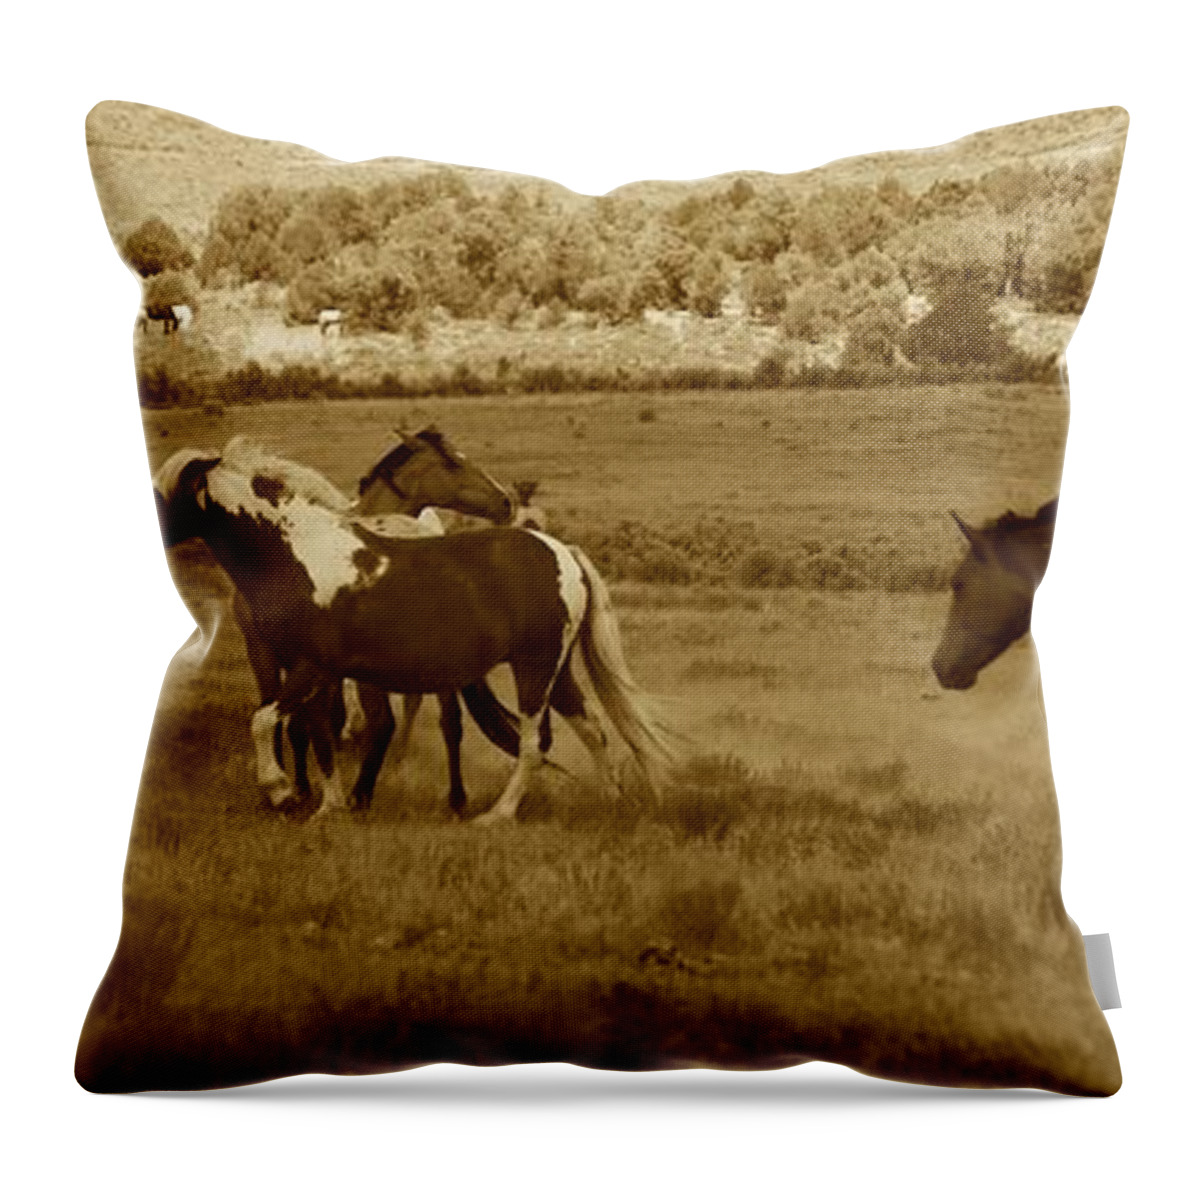 Horse Throw Pillow featuring the photograph And They Roam by Veronica Batterson